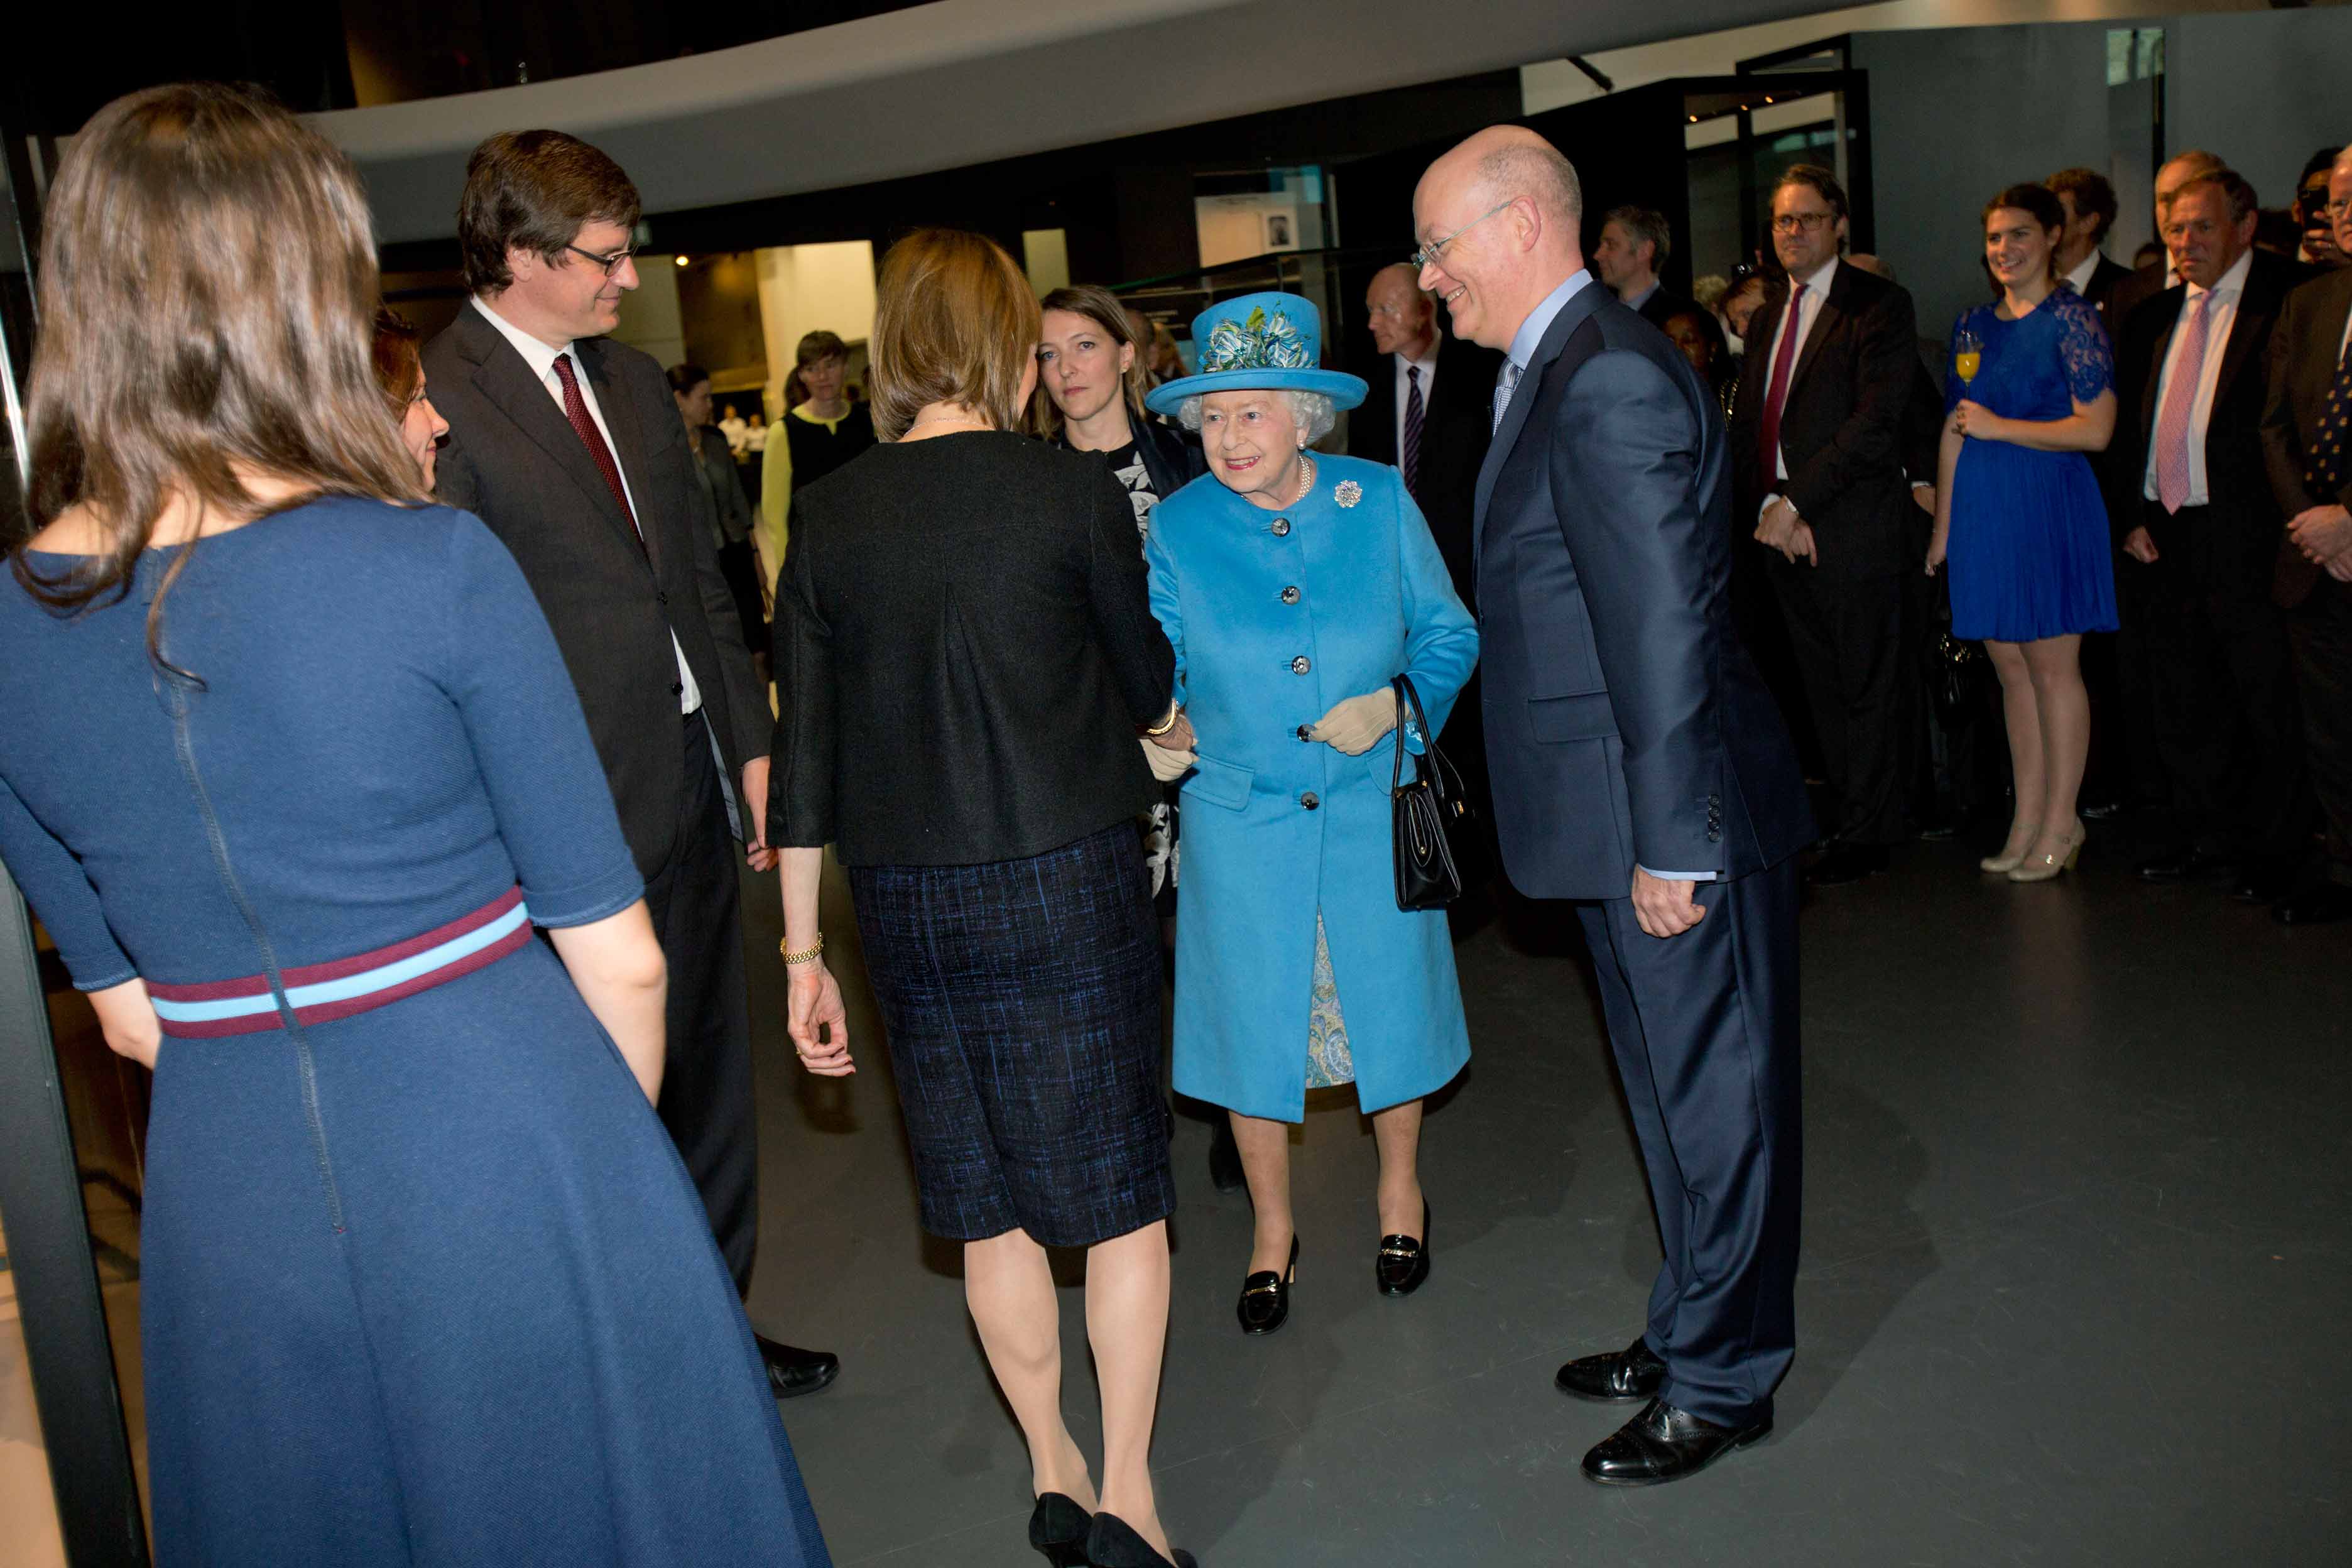 The Queen meets Patricia E. Harris, CEO of Bloomberg Philanthropies and Brian McClendon, VP Engineering, Google at the opening of the Information Age gallery. Image credit: Tim Anderson